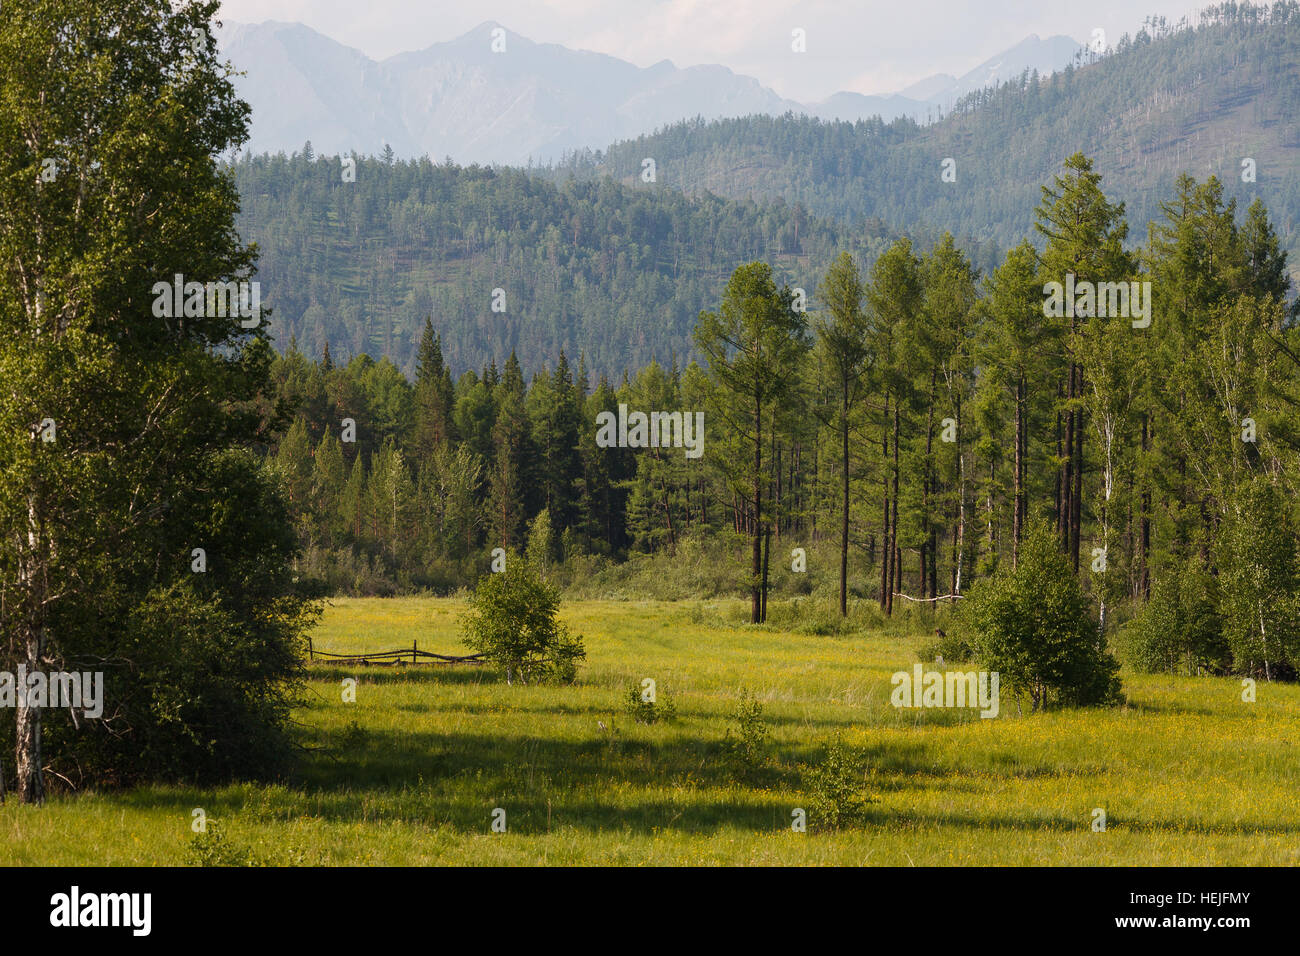 Field, forest and mountains in Tunka valley, Buryatia, Russia Stock Photo